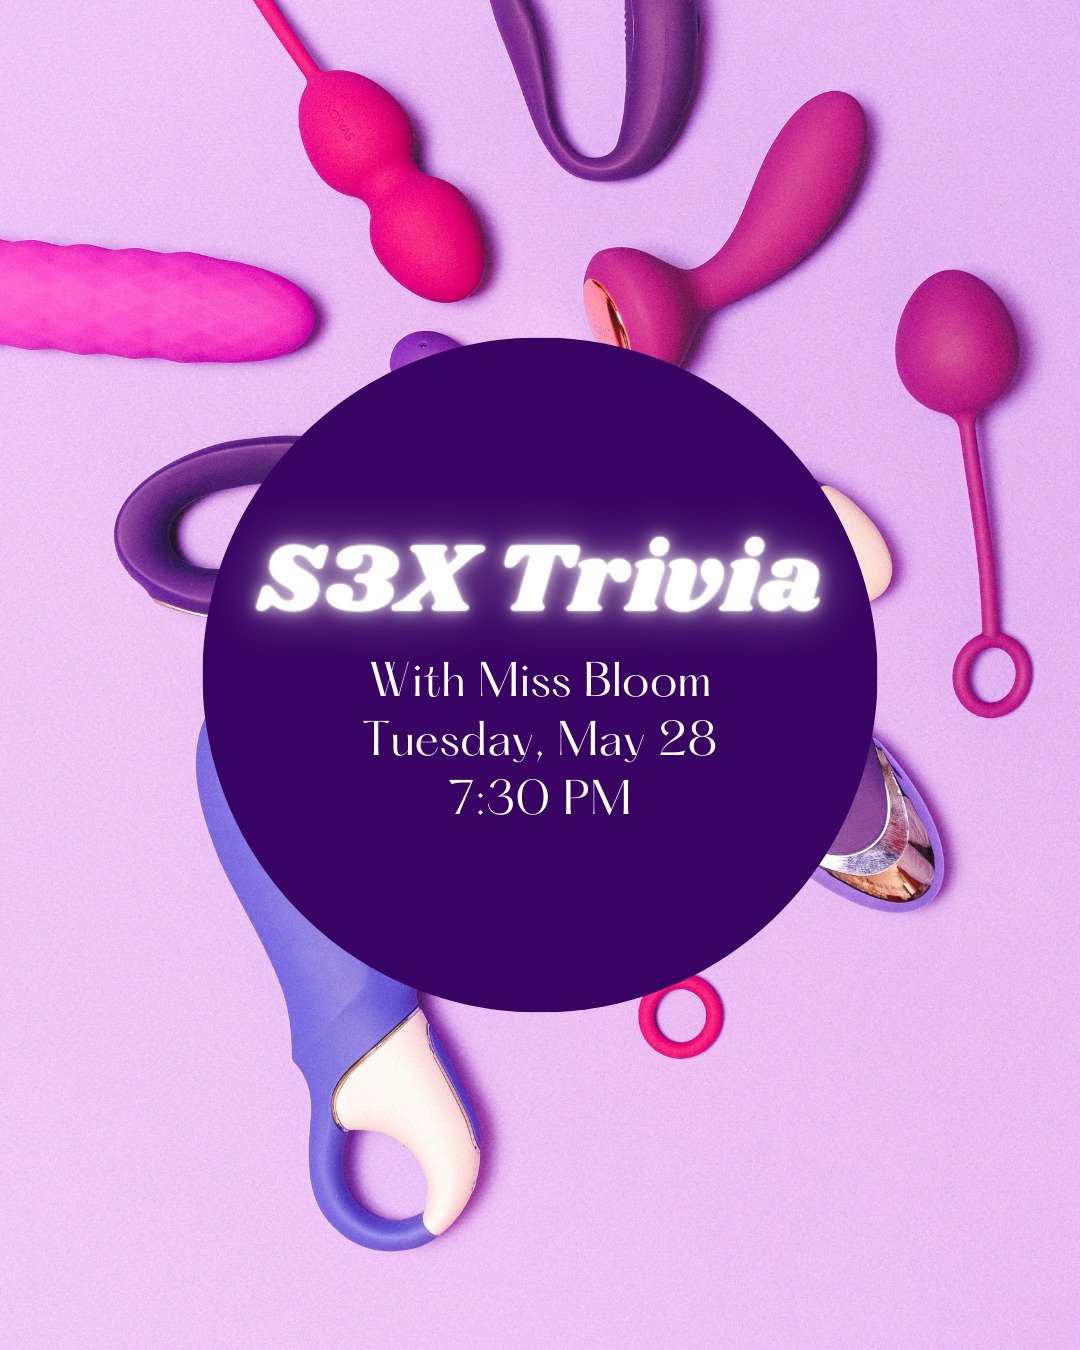 A new date for trivia! You know where to get your tickets.

💥 UPCOMING EVENTS 💥
📅 May 19: PlayDay (PRIVATE LIST)

📅 May 21: HMU Academy: Playfighting with @lolajeandotcom

📅 May 22: HMU Academy: Beyond the Basics - Advanced K!nk &amp; BDeeSM Sam